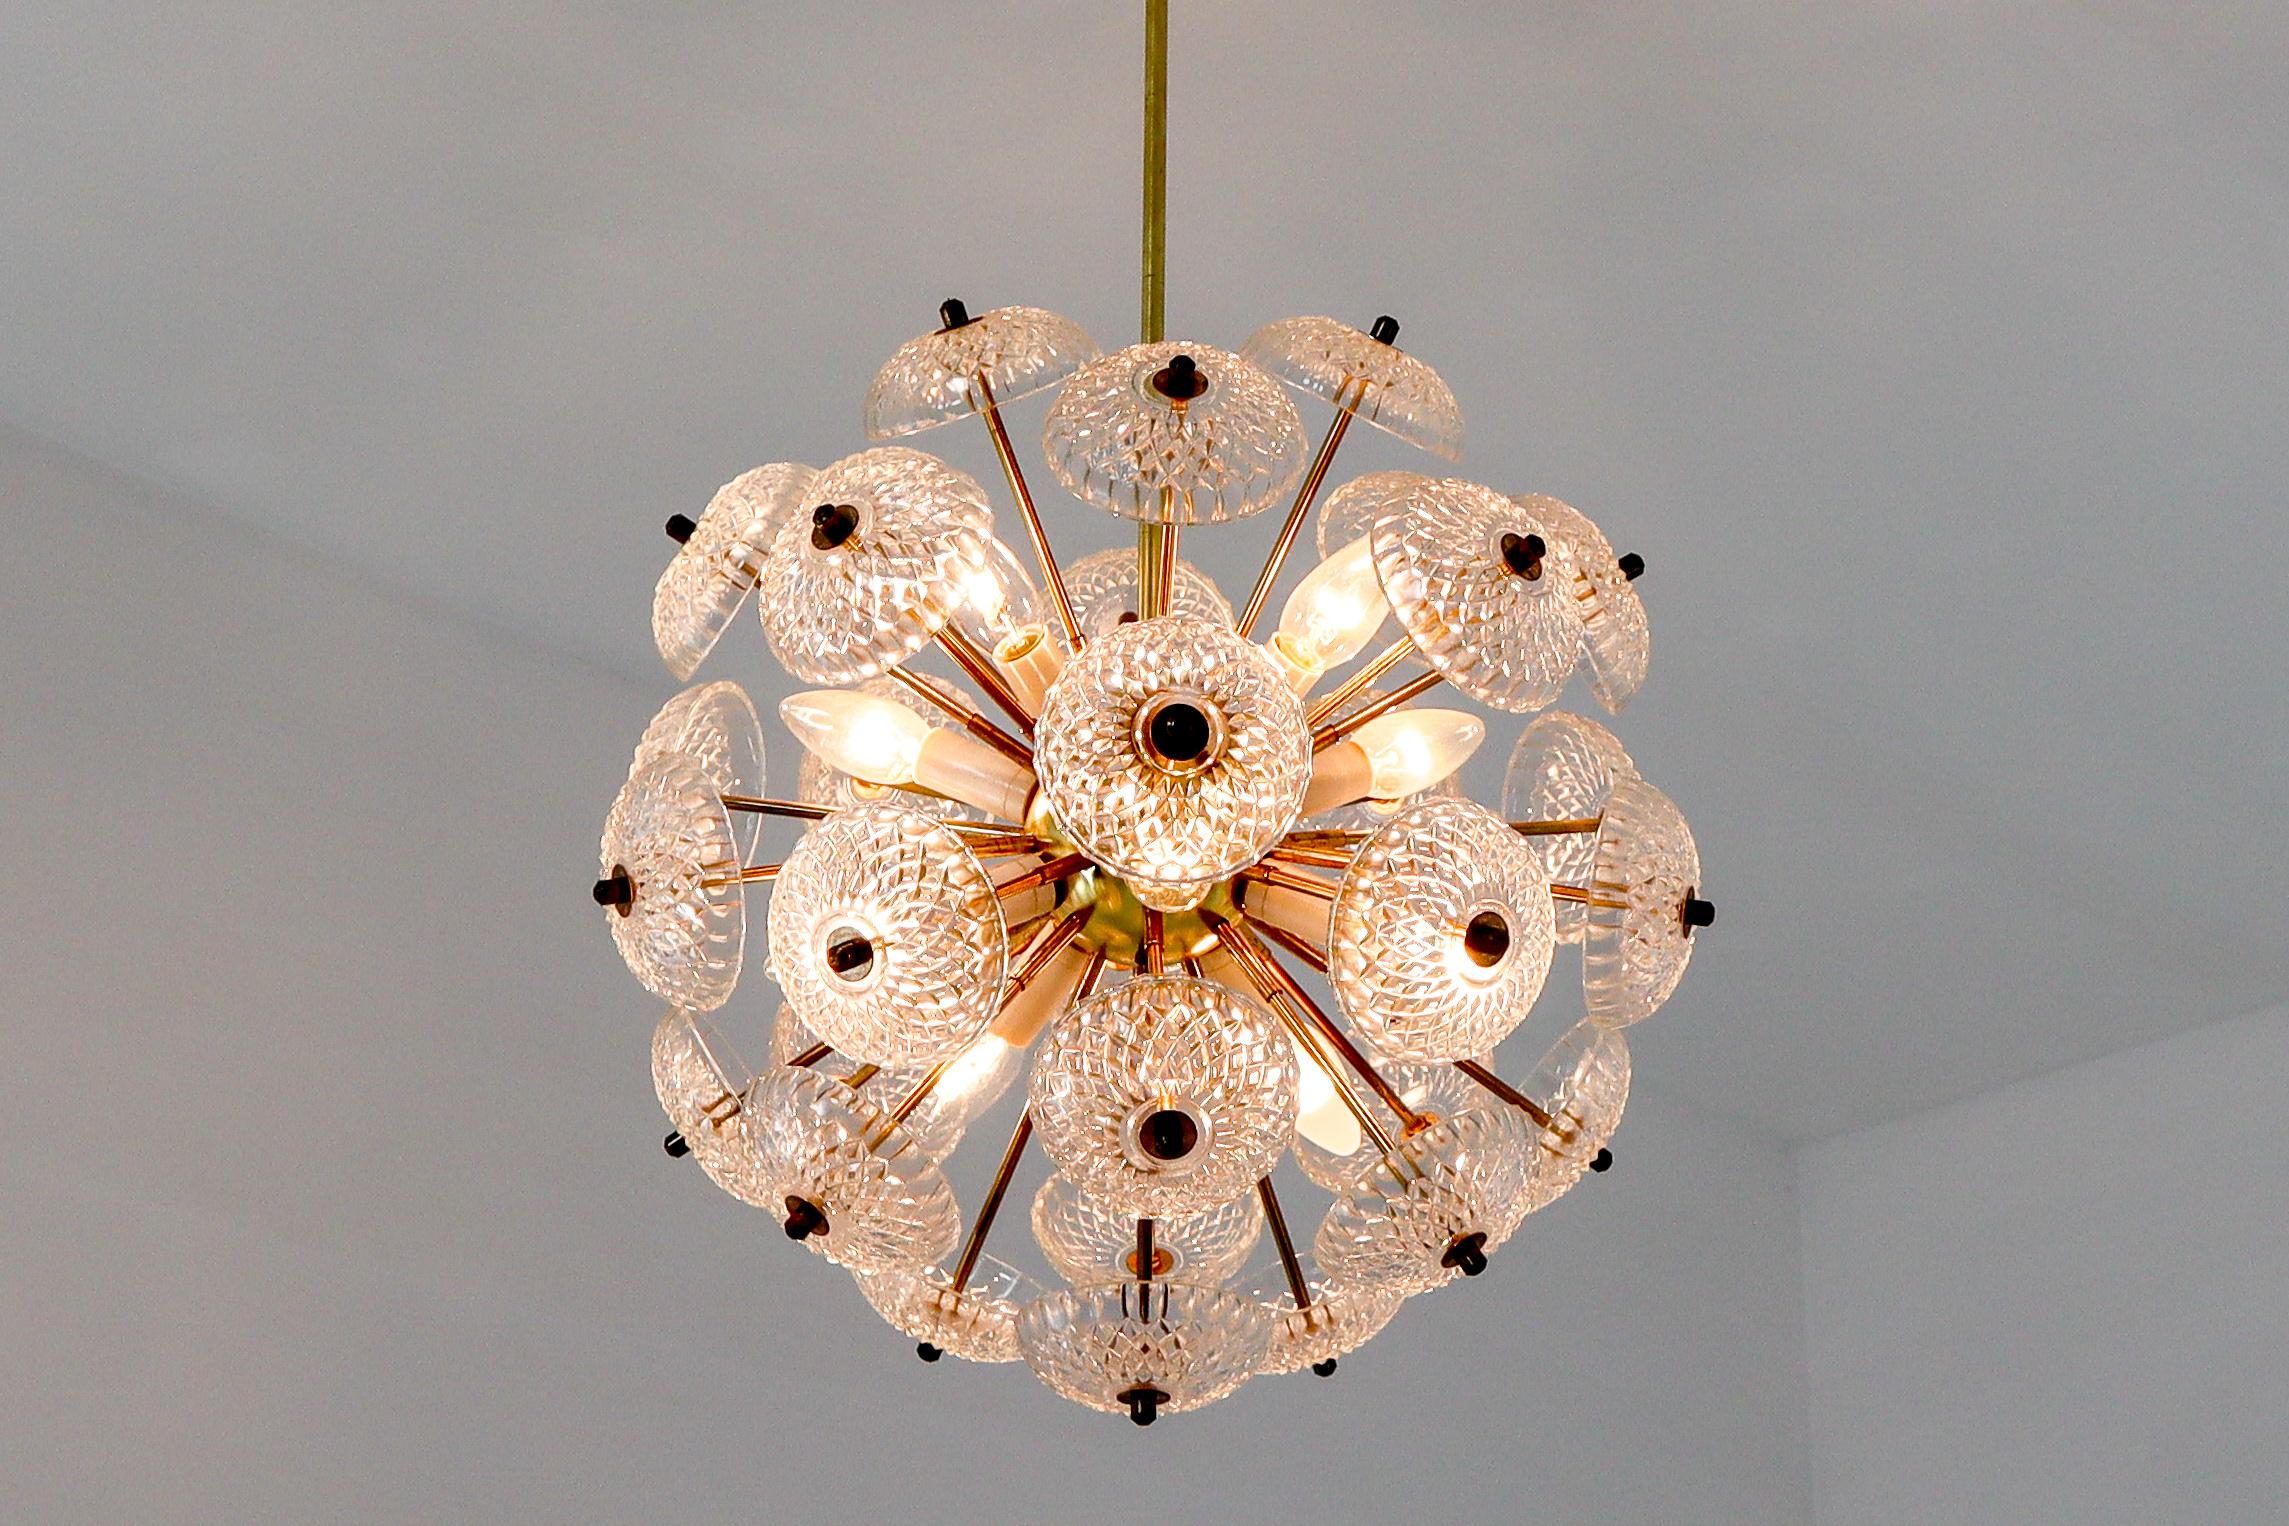 Midcentury brass floral chandeliers in the style of Emil Stejnar. ( 12 x on stock ).

Made of brass with stylish floral glass disc glass light diffuses. The lamp is covered with art glasses which scatter the light in a unique and very charming way